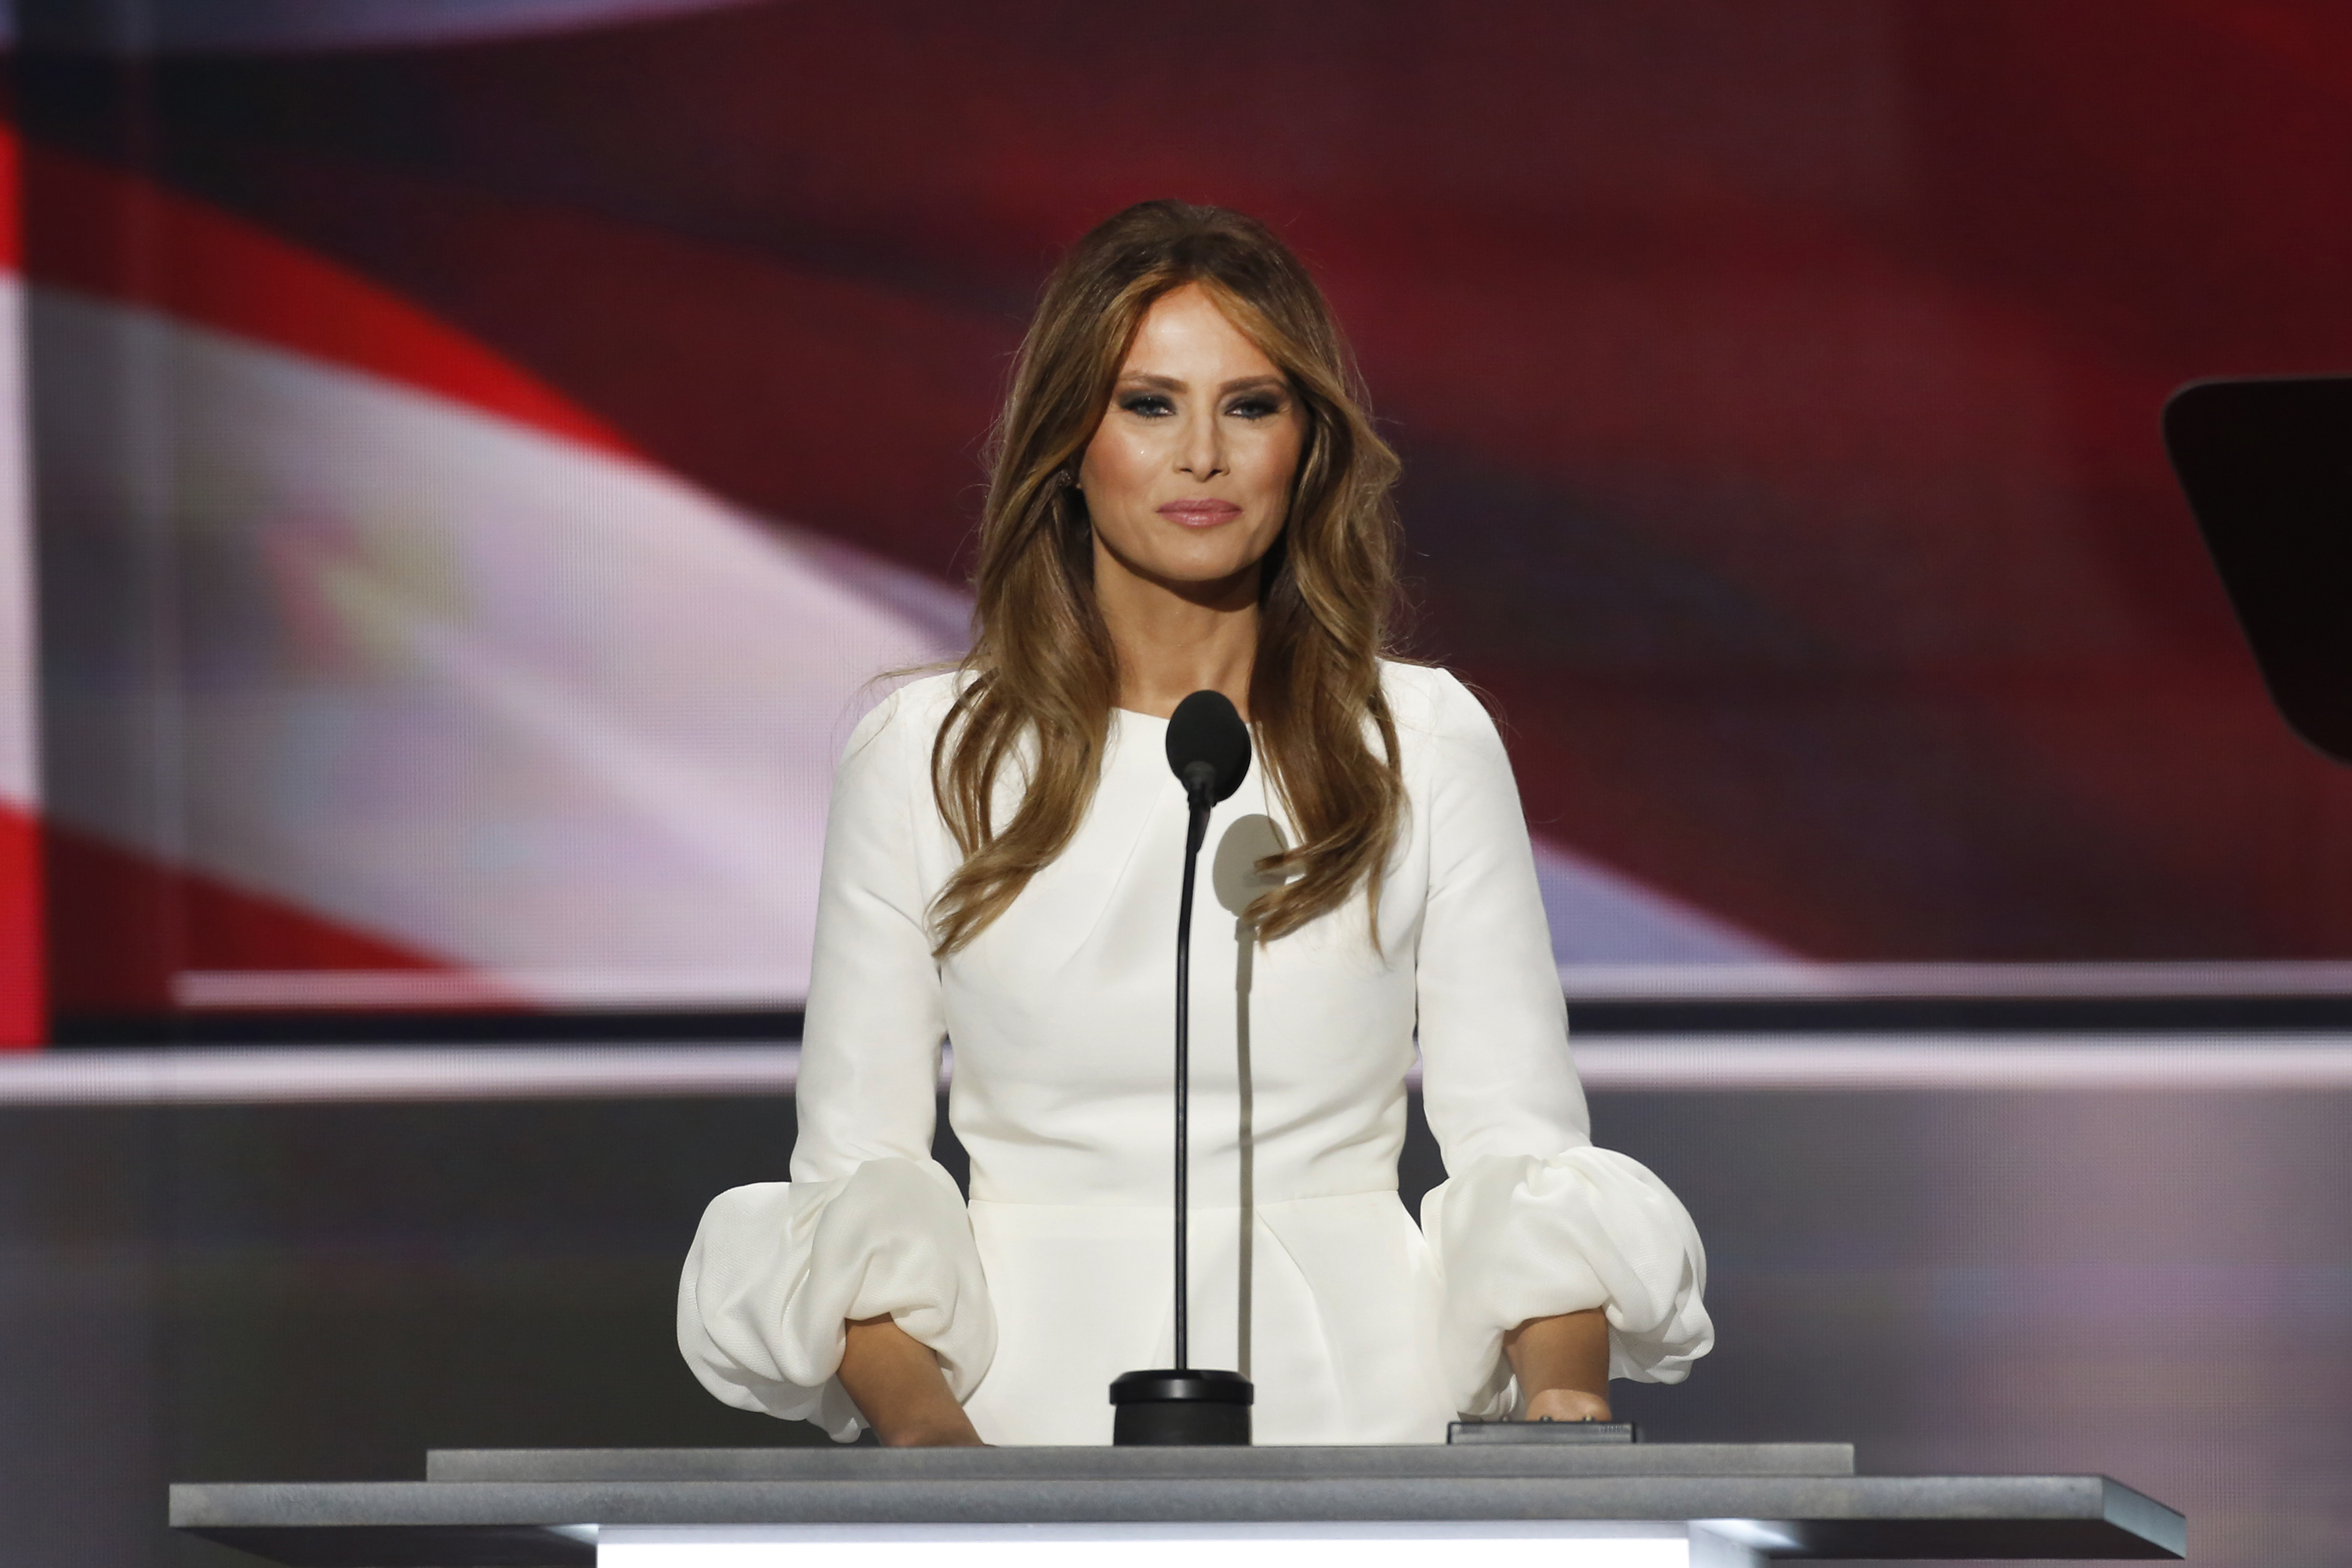 Melania Trump speaks during the Republican National Convention in Cleveland, Ohio, on July 18, 2016. (Carolyn Cole—LA Times via Getty Images)